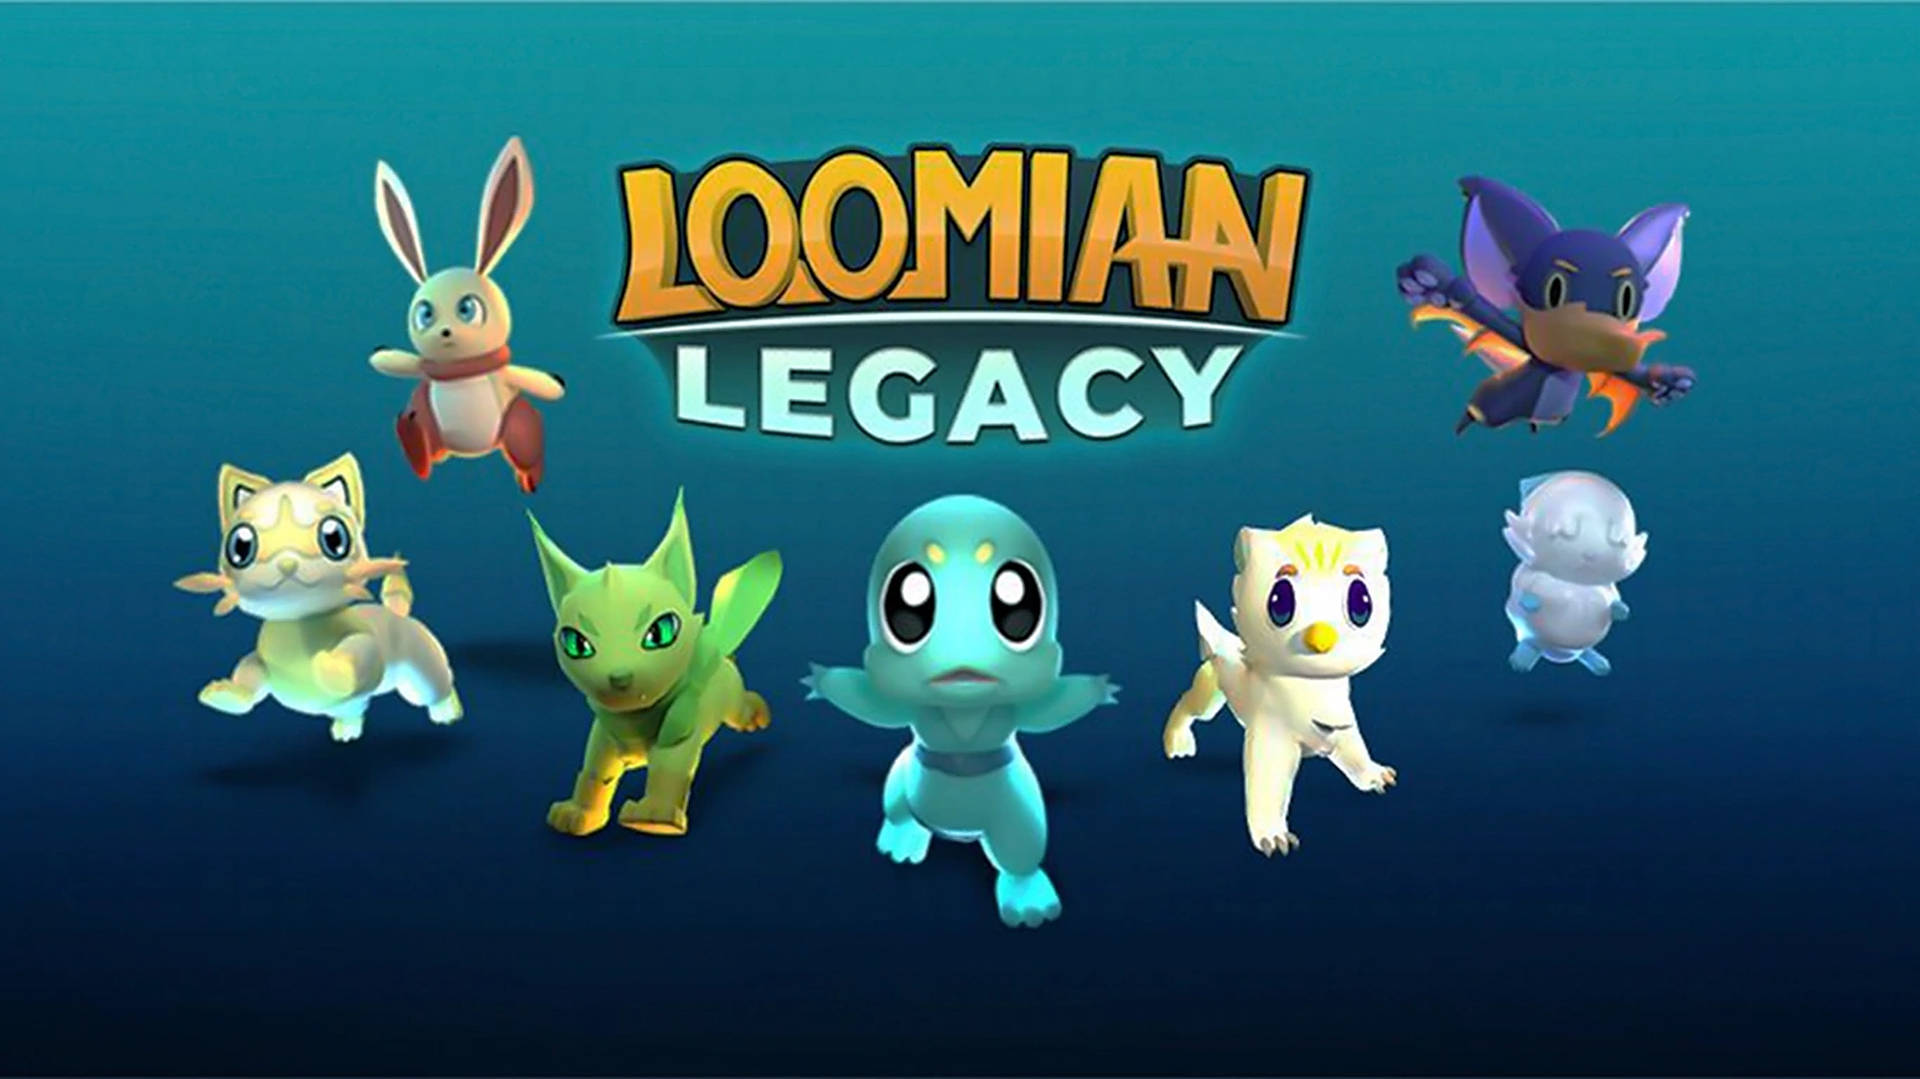 Loomian Legacy Poster Wallpaper